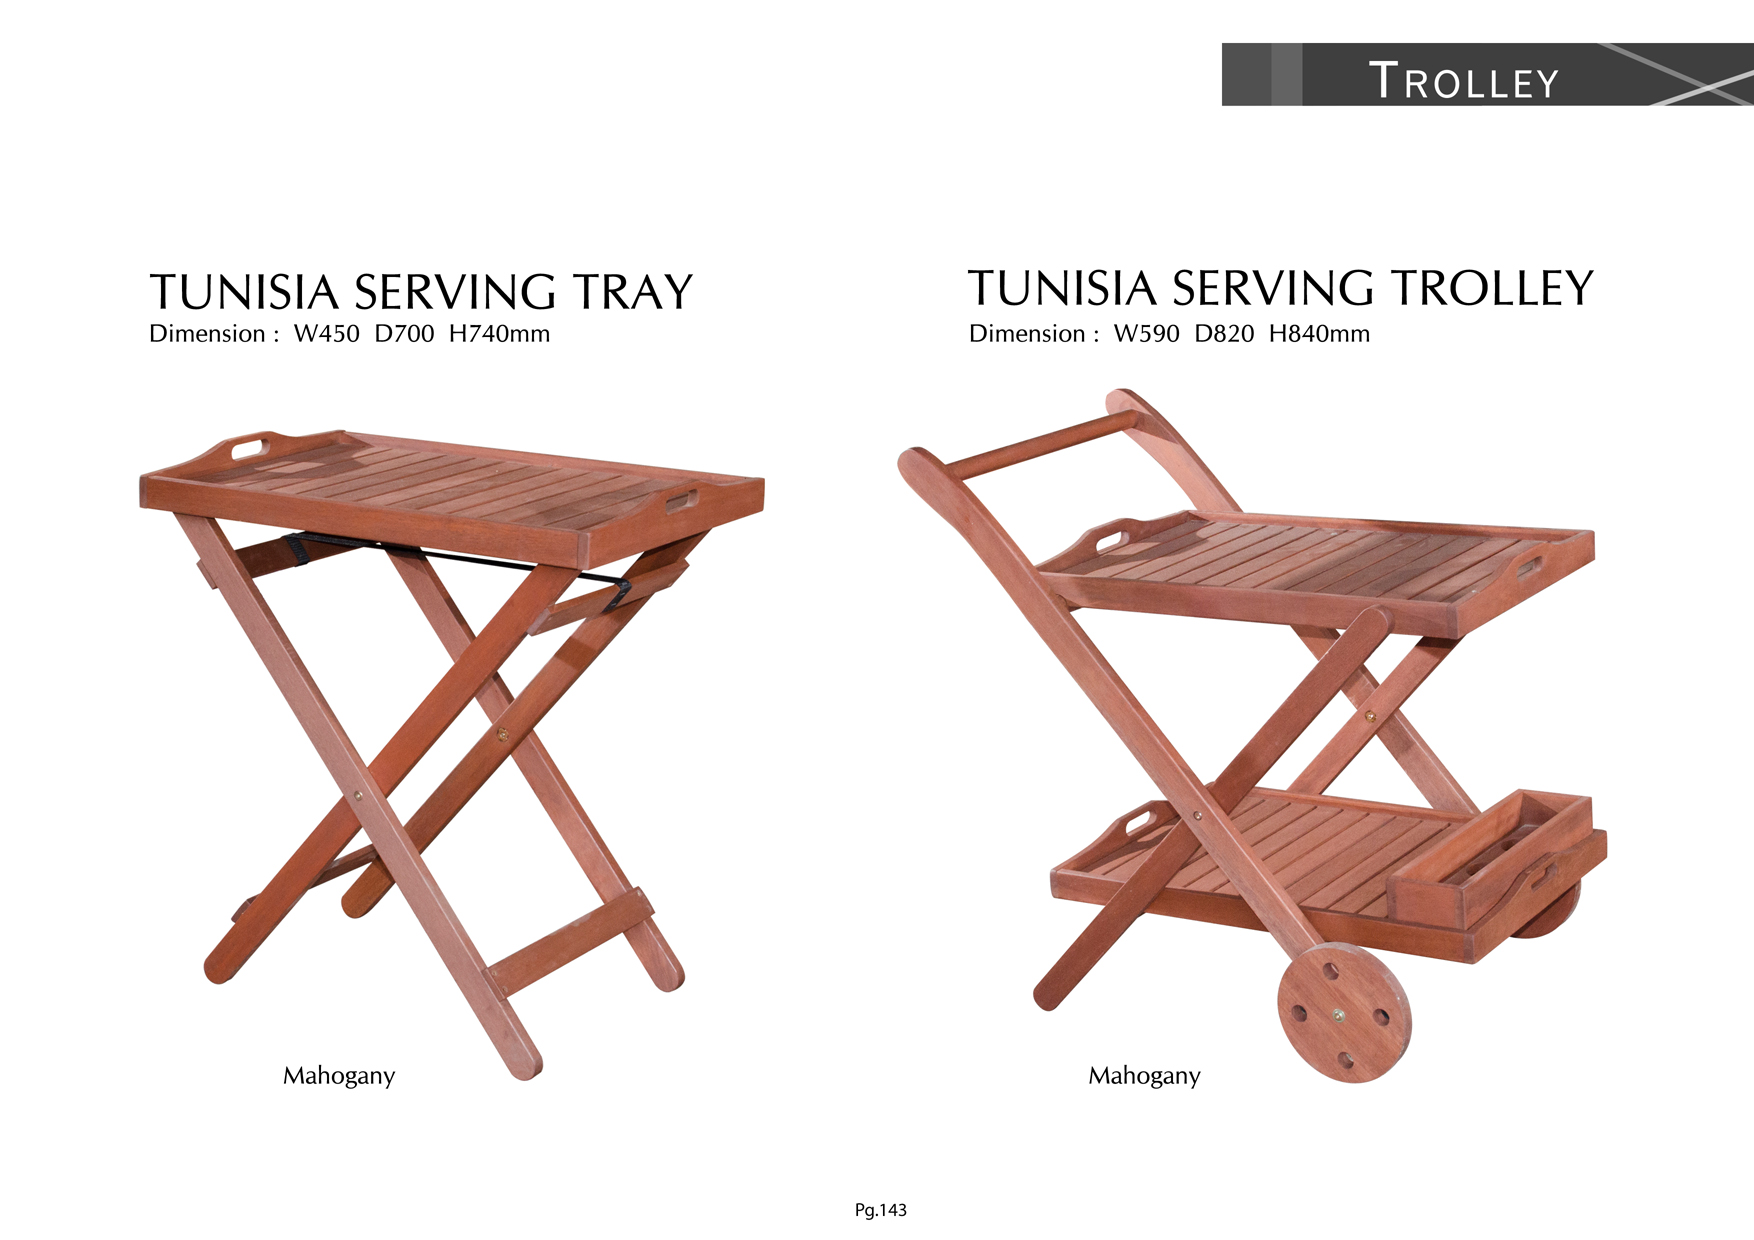 Product: PG143. TUNISIA SERVING TRAY & TROLLEY